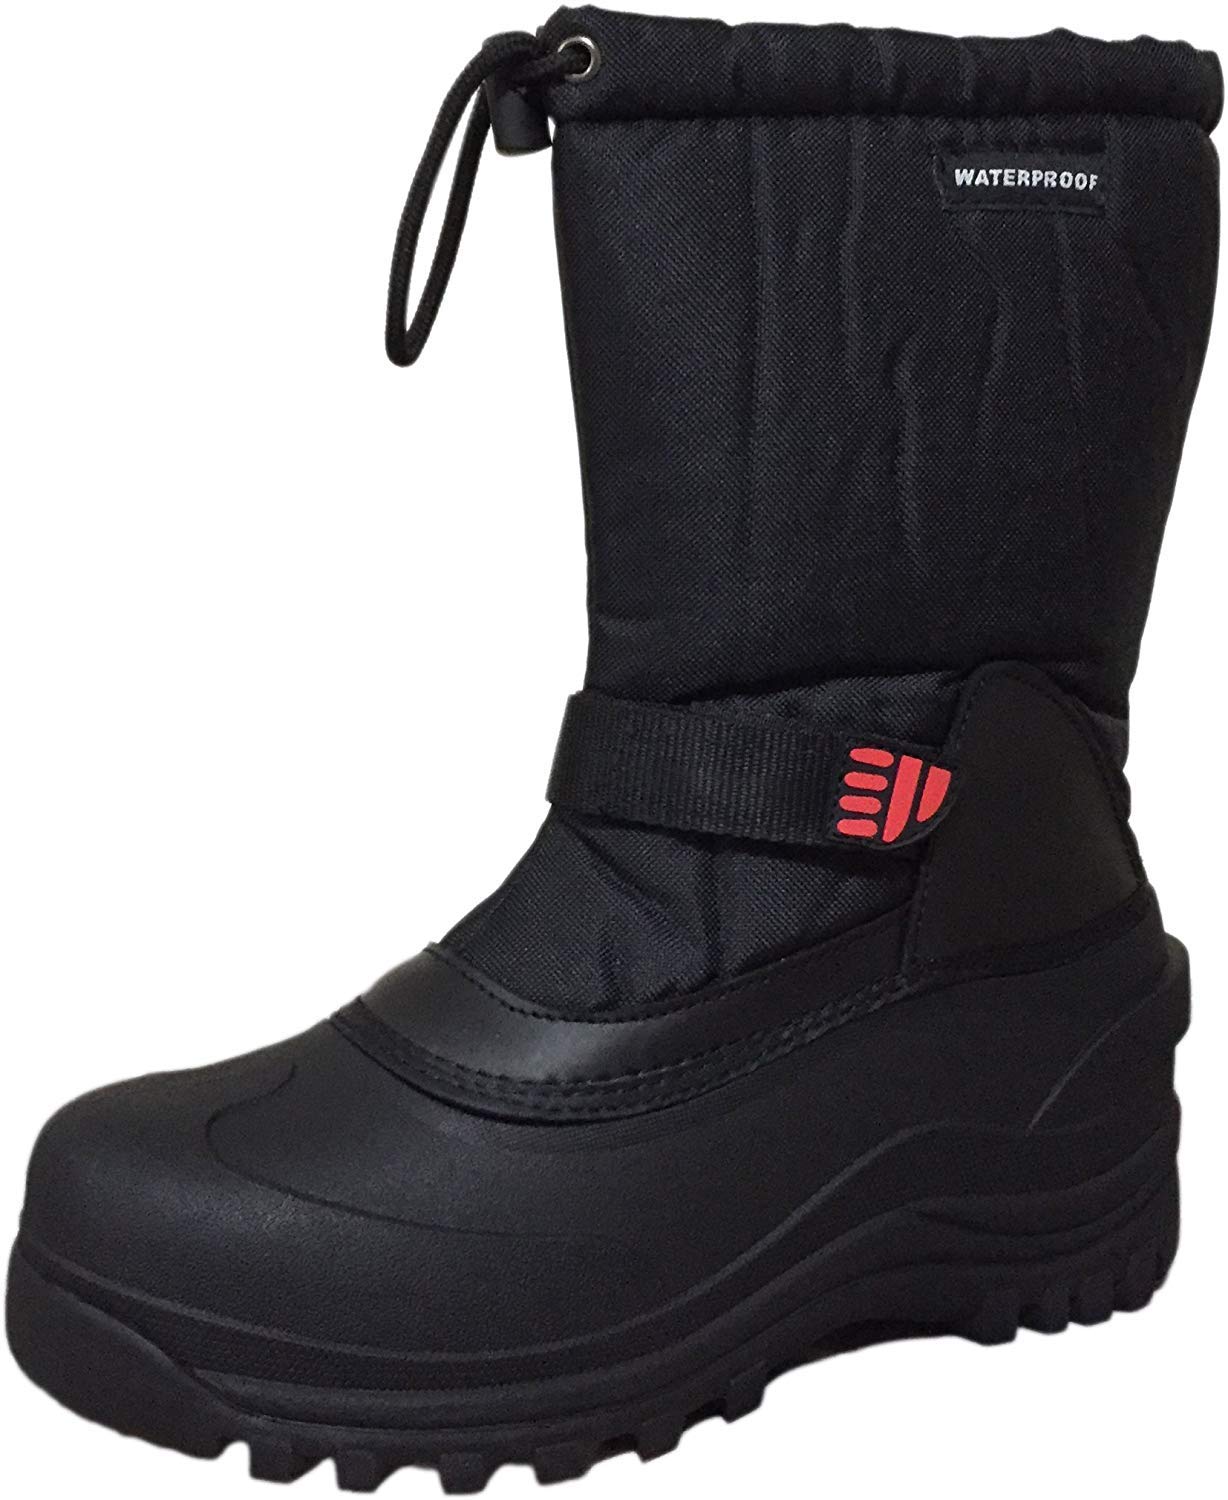 CLIMATEX Climate X Mens Ysc5 Snow Boot, Black, Size 8.0